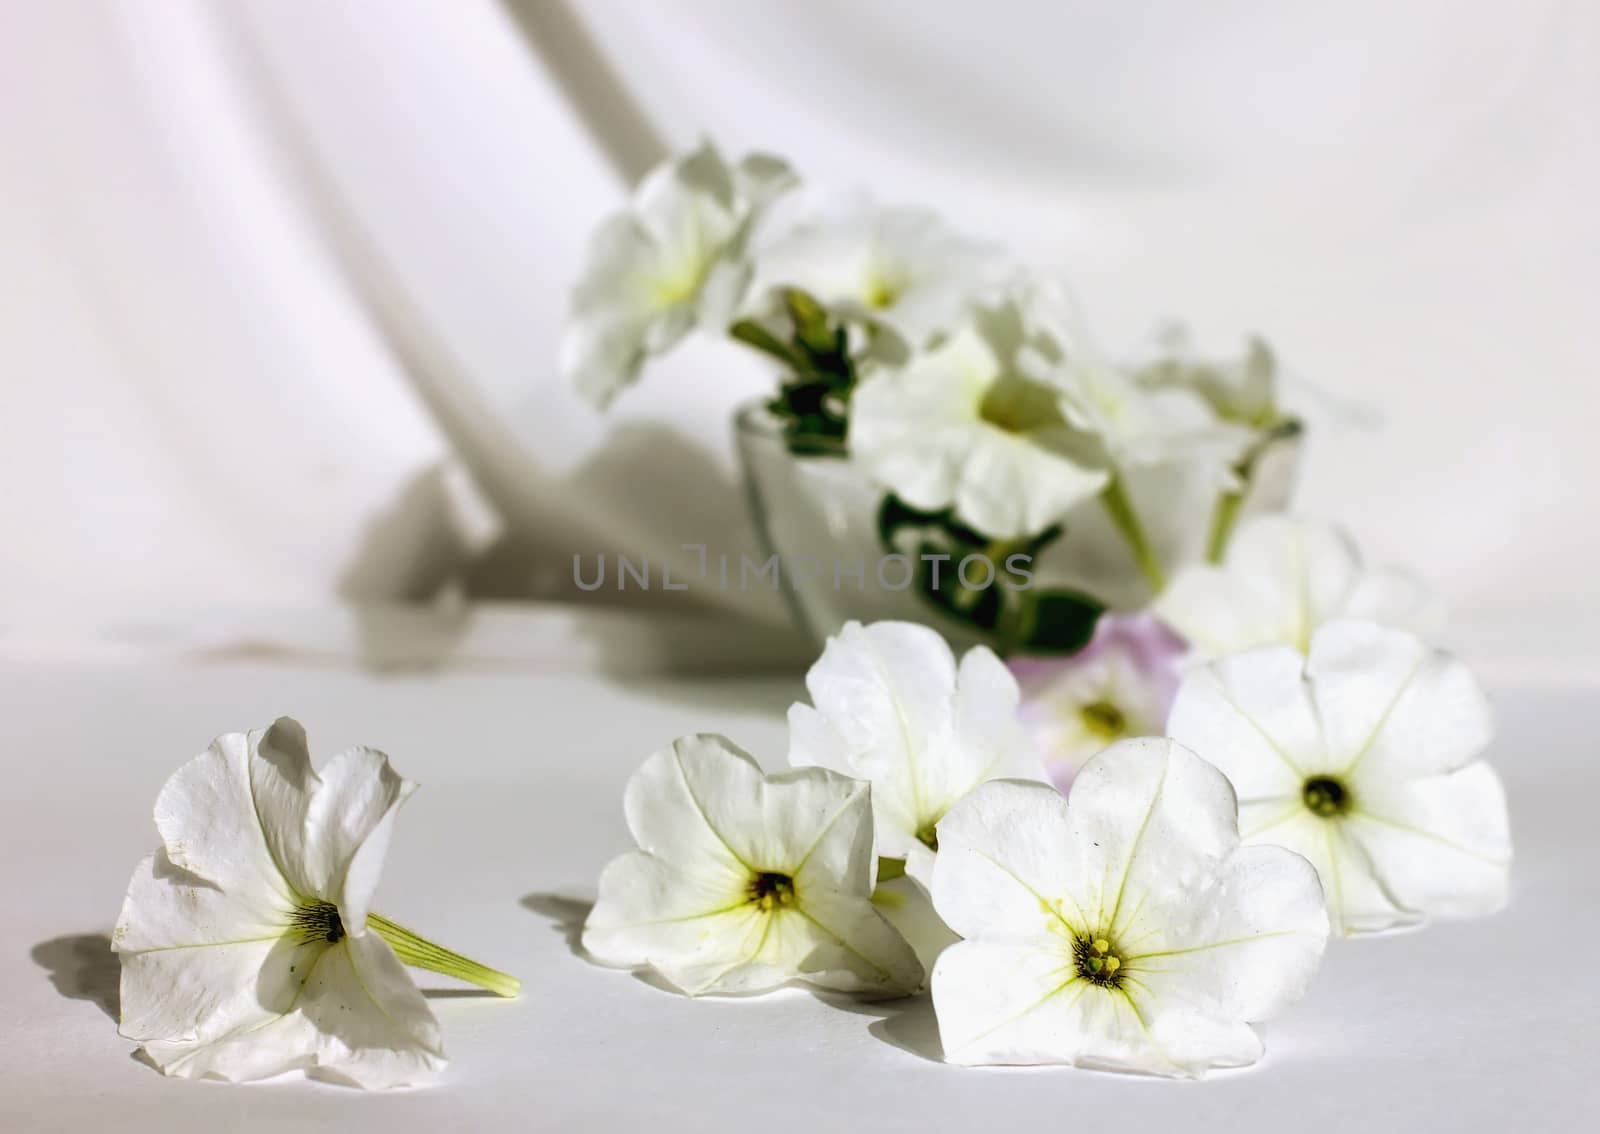 Still life with white petunias on a white fabric flowers in whit by KoliadzynskaIryna